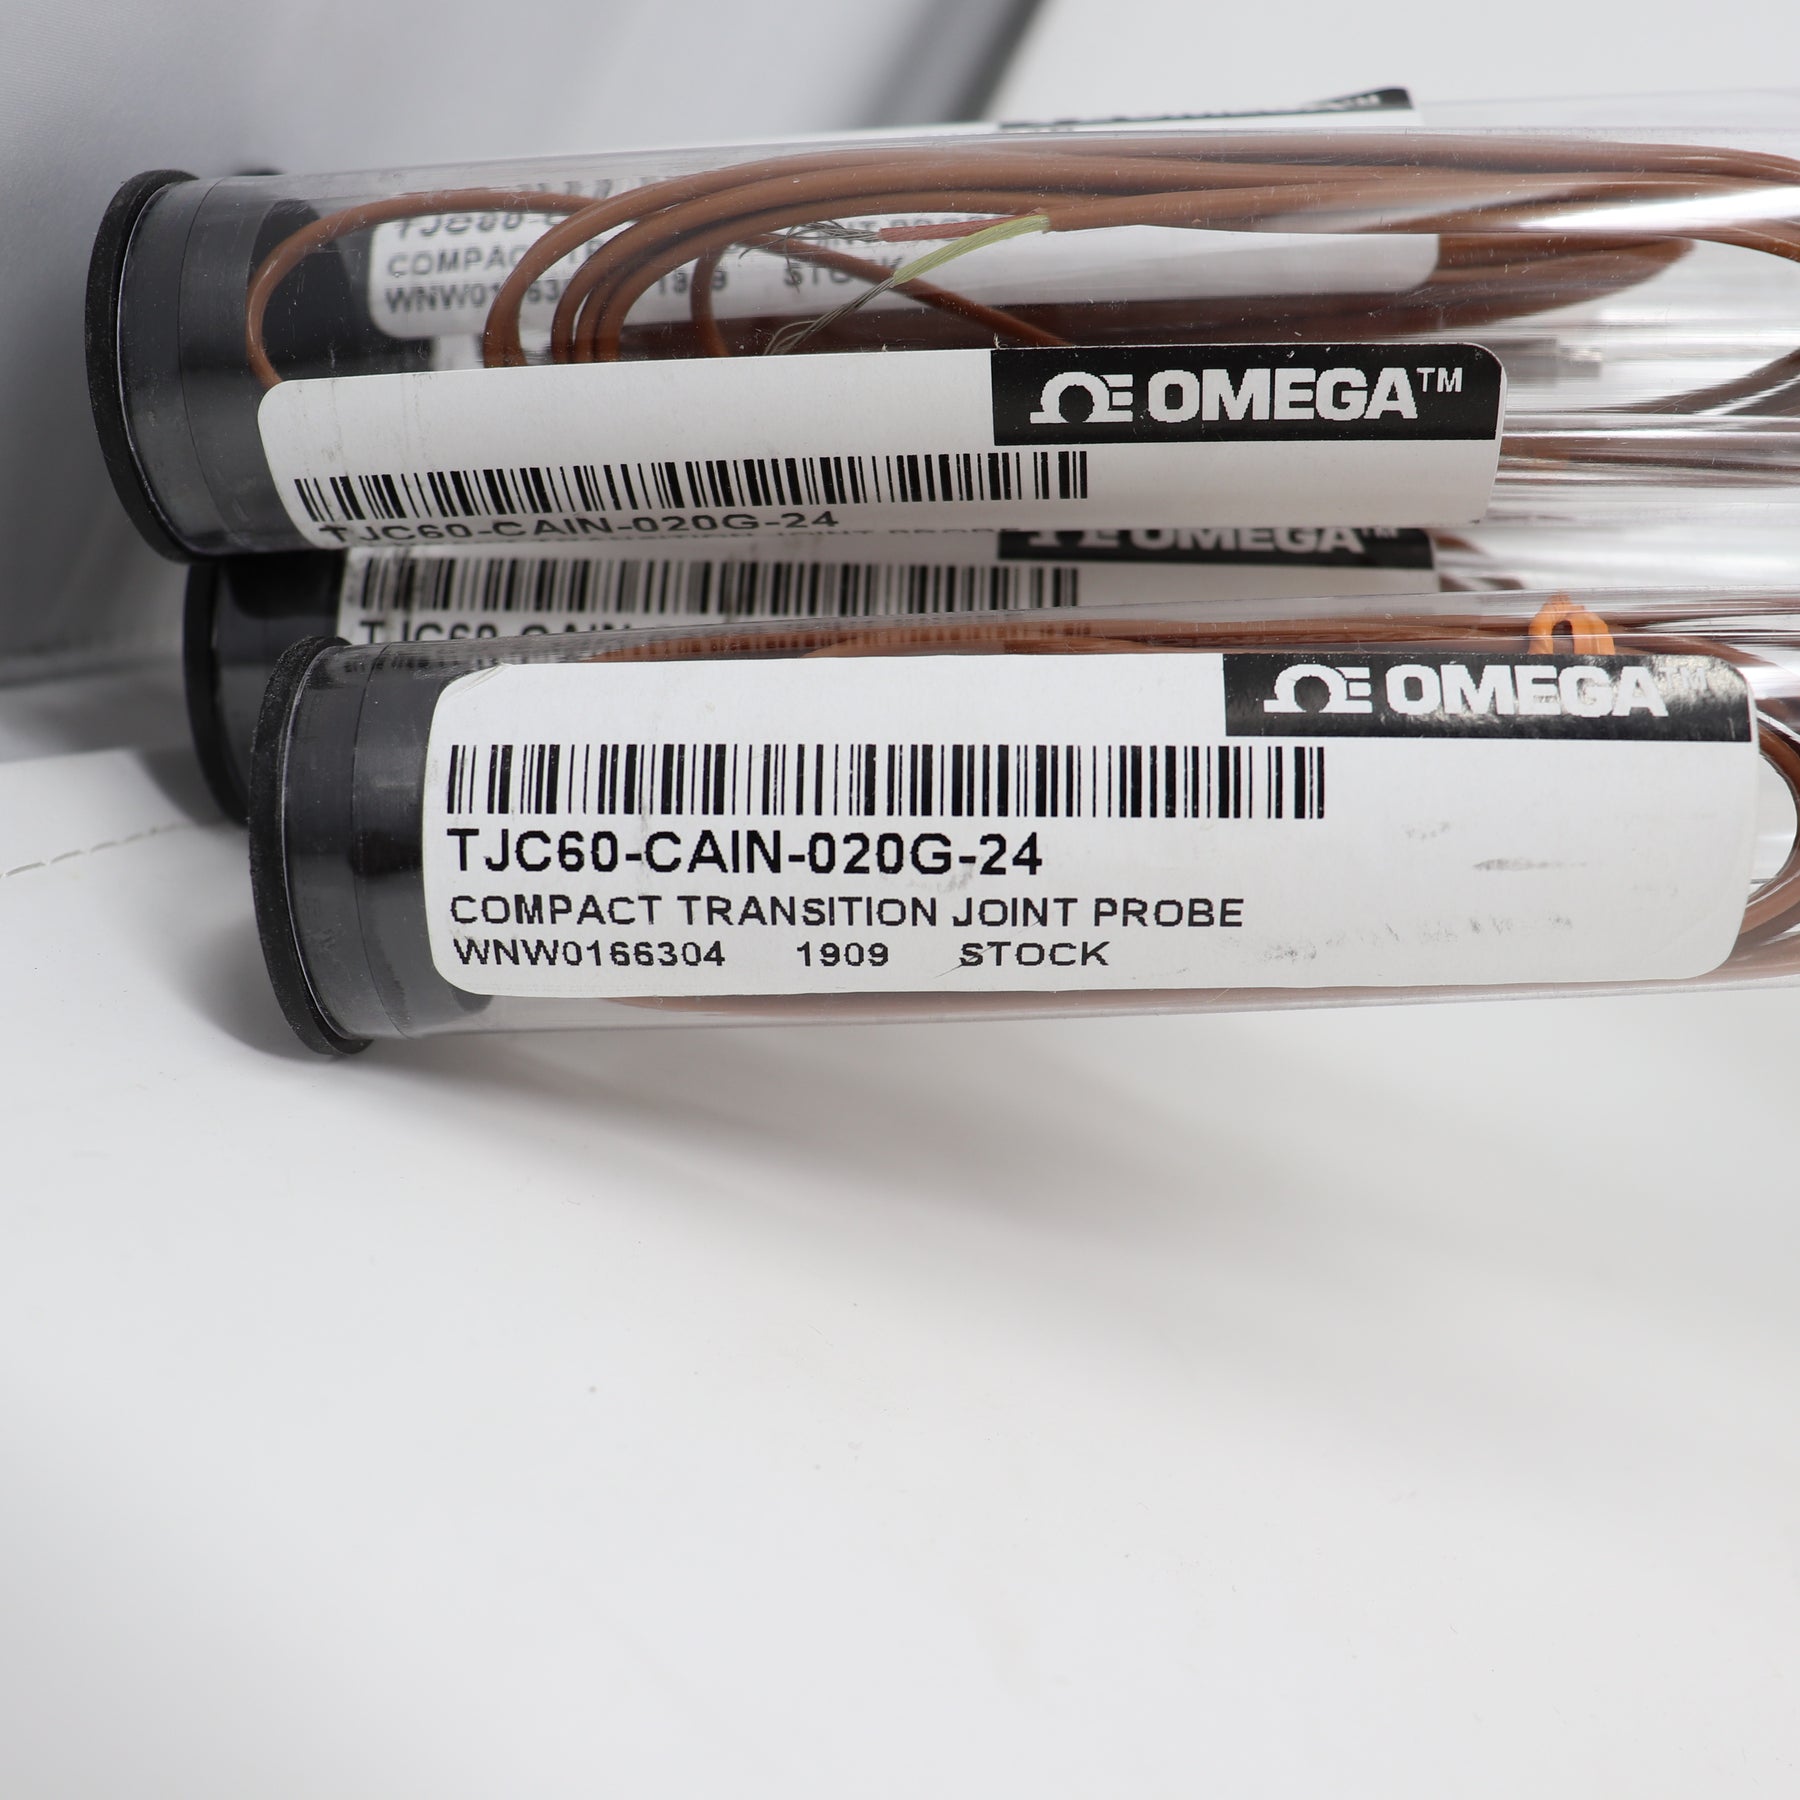 Lot of (5) Omega Compact Transition Joint Thermocouple Probe TJC60-CAIN-020g-24